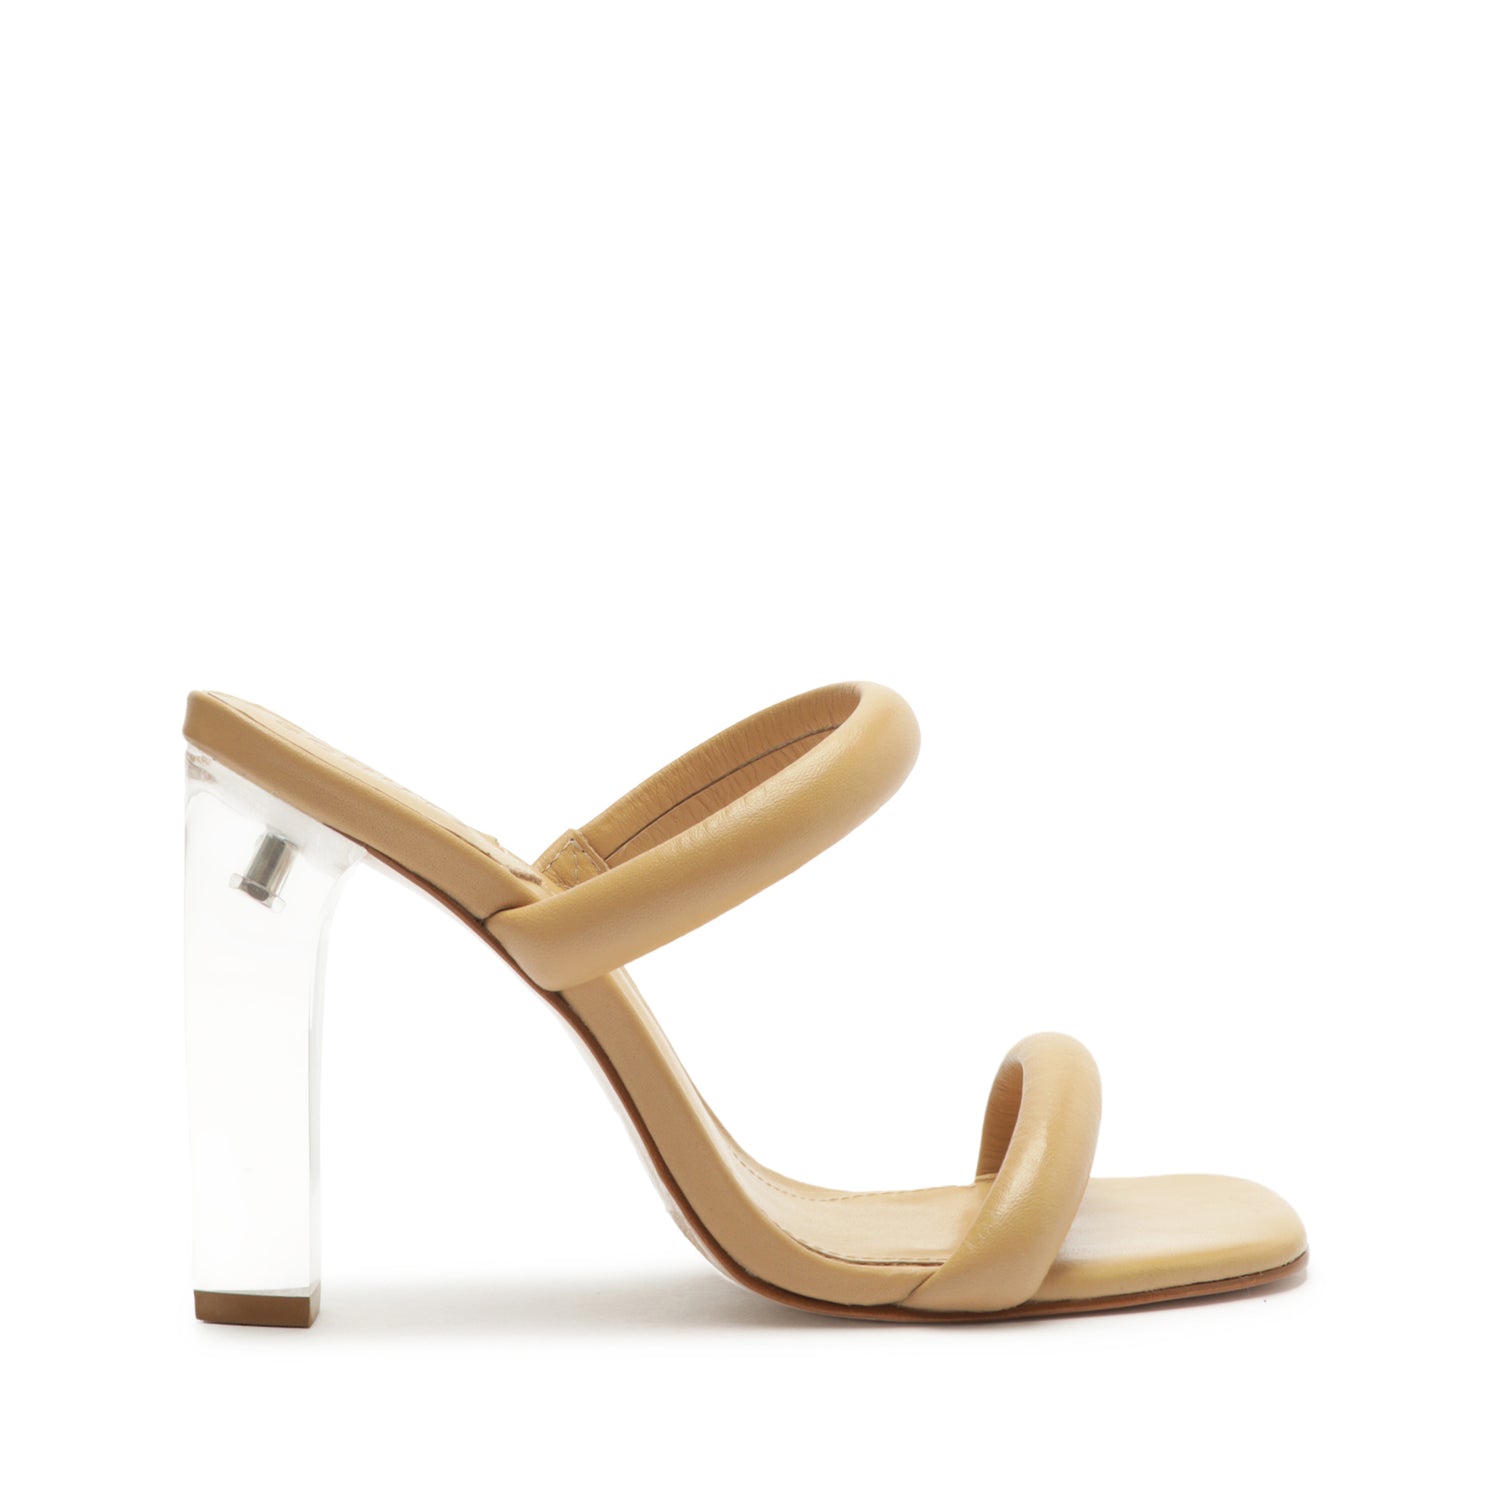 Ully Acrylic Nappa Leather Sandal Sandals High Summer 23 5 Light Beige Nappa Leather - Schutz Shoes